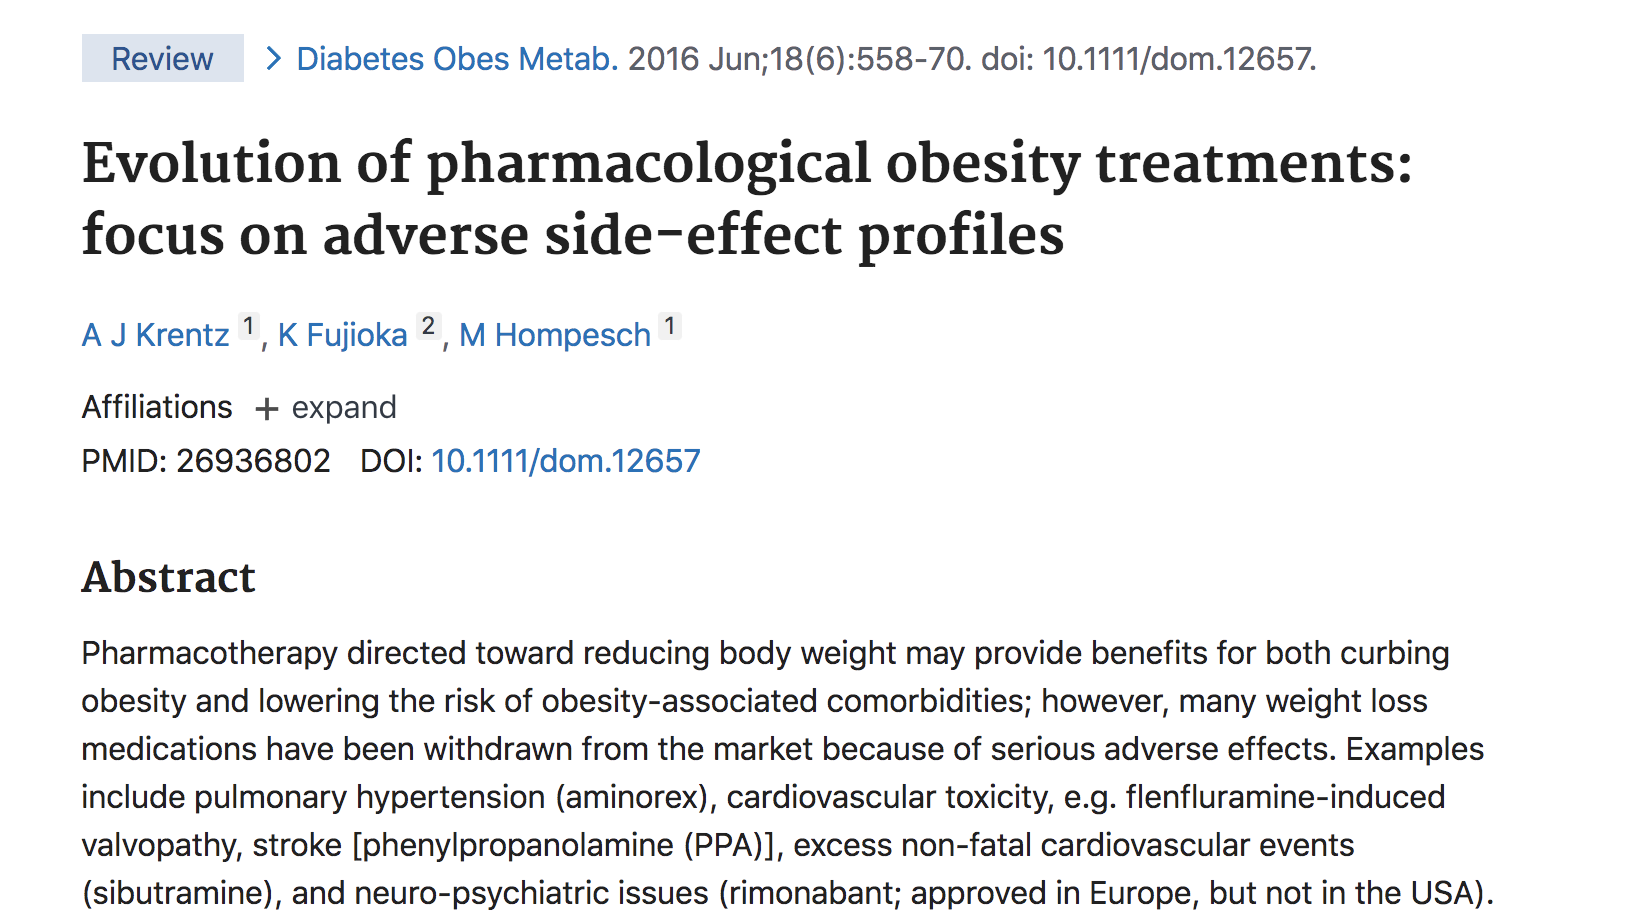 image of Evolution of pharmacological obesity treatments: focus on adverse side-effect profiles.